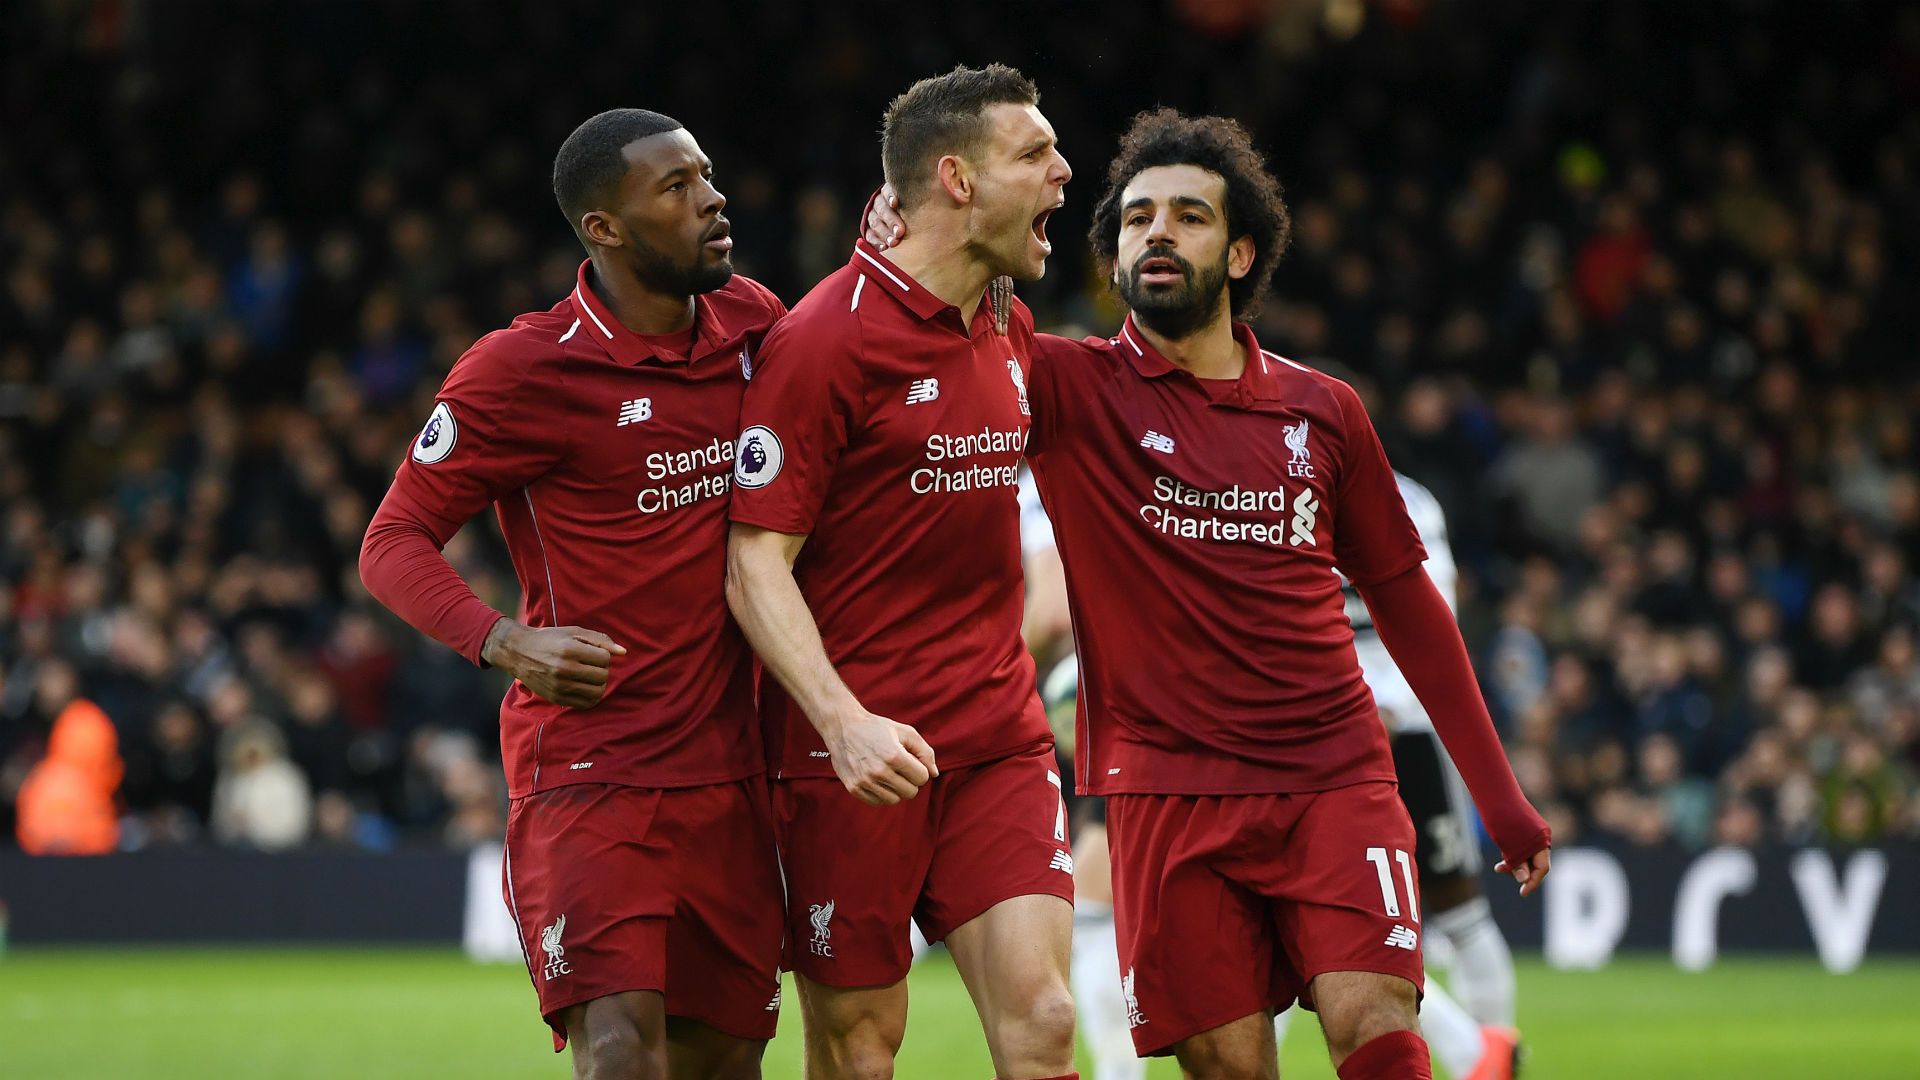 Mane And Milner Rescue Liverpool In 2-1 Win Over Fulham, Sending Red Back Top